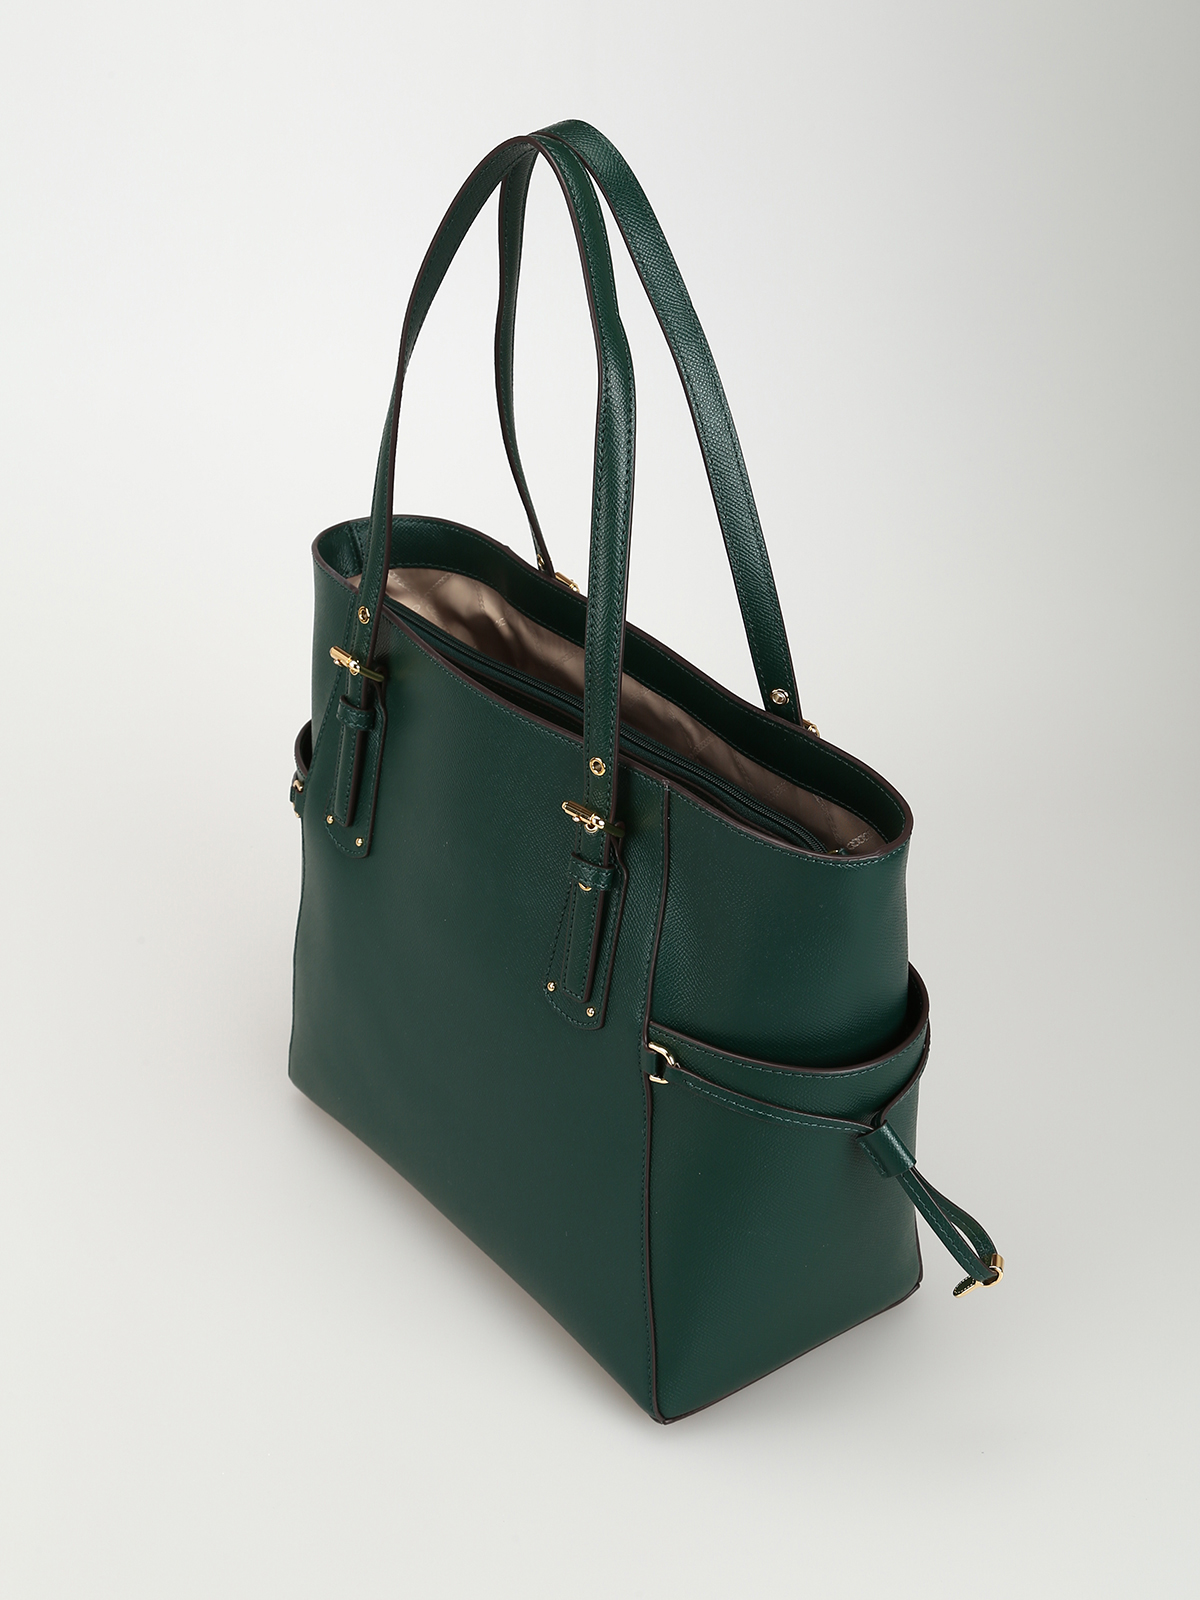 green grainy leather bag - totes bags 